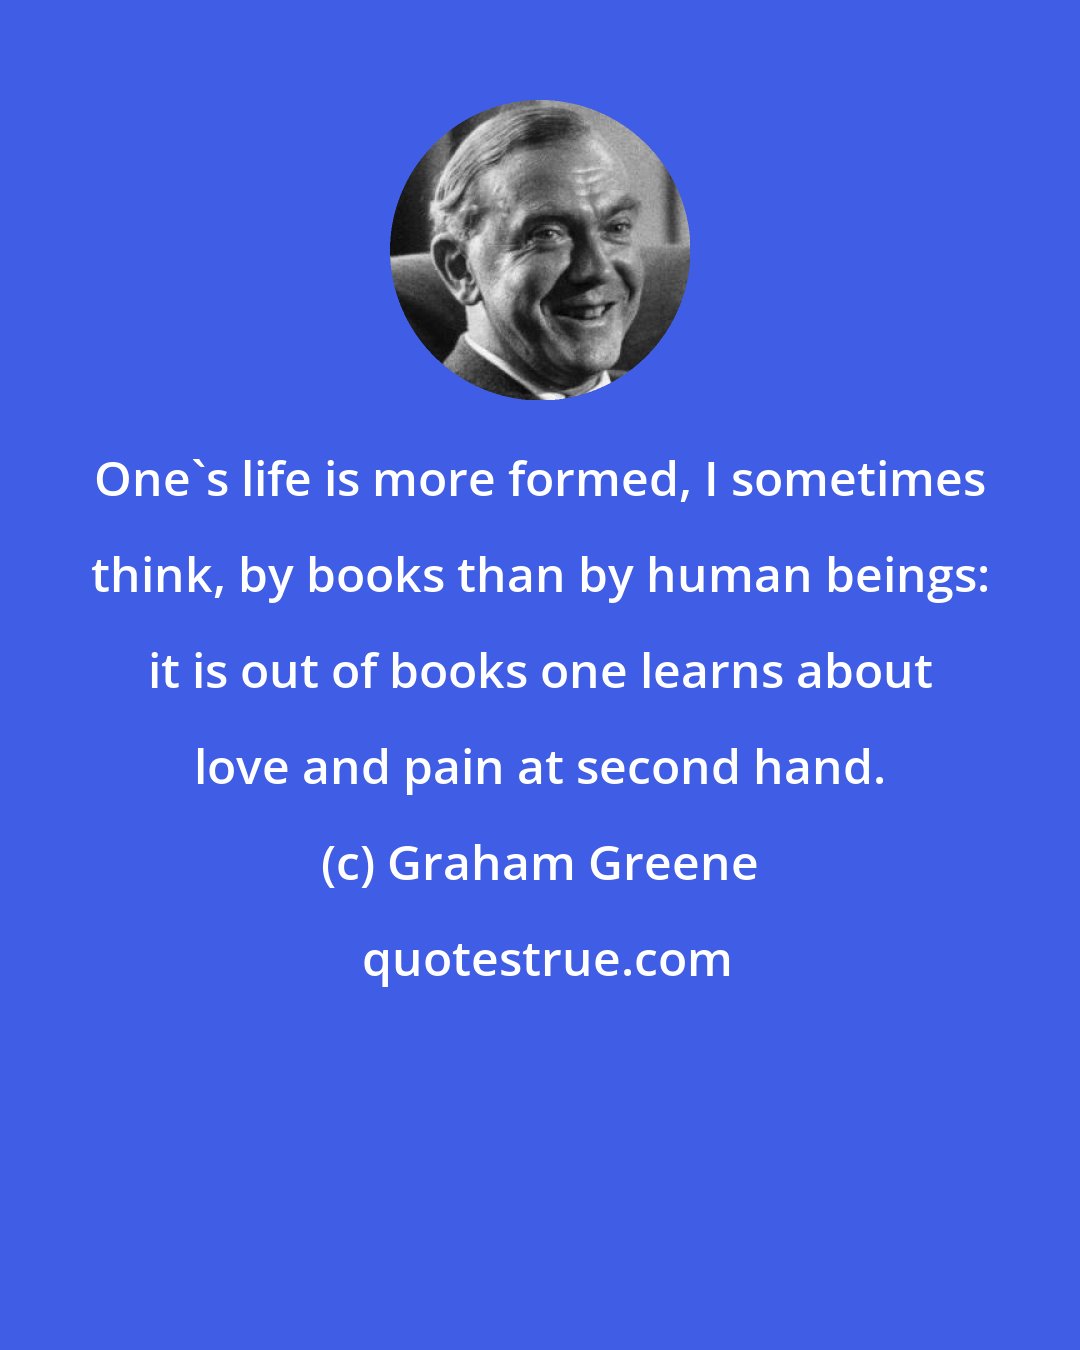 Graham Greene: One's life is more formed, I sometimes think, by books than by human beings: it is out of books one learns about love and pain at second hand.